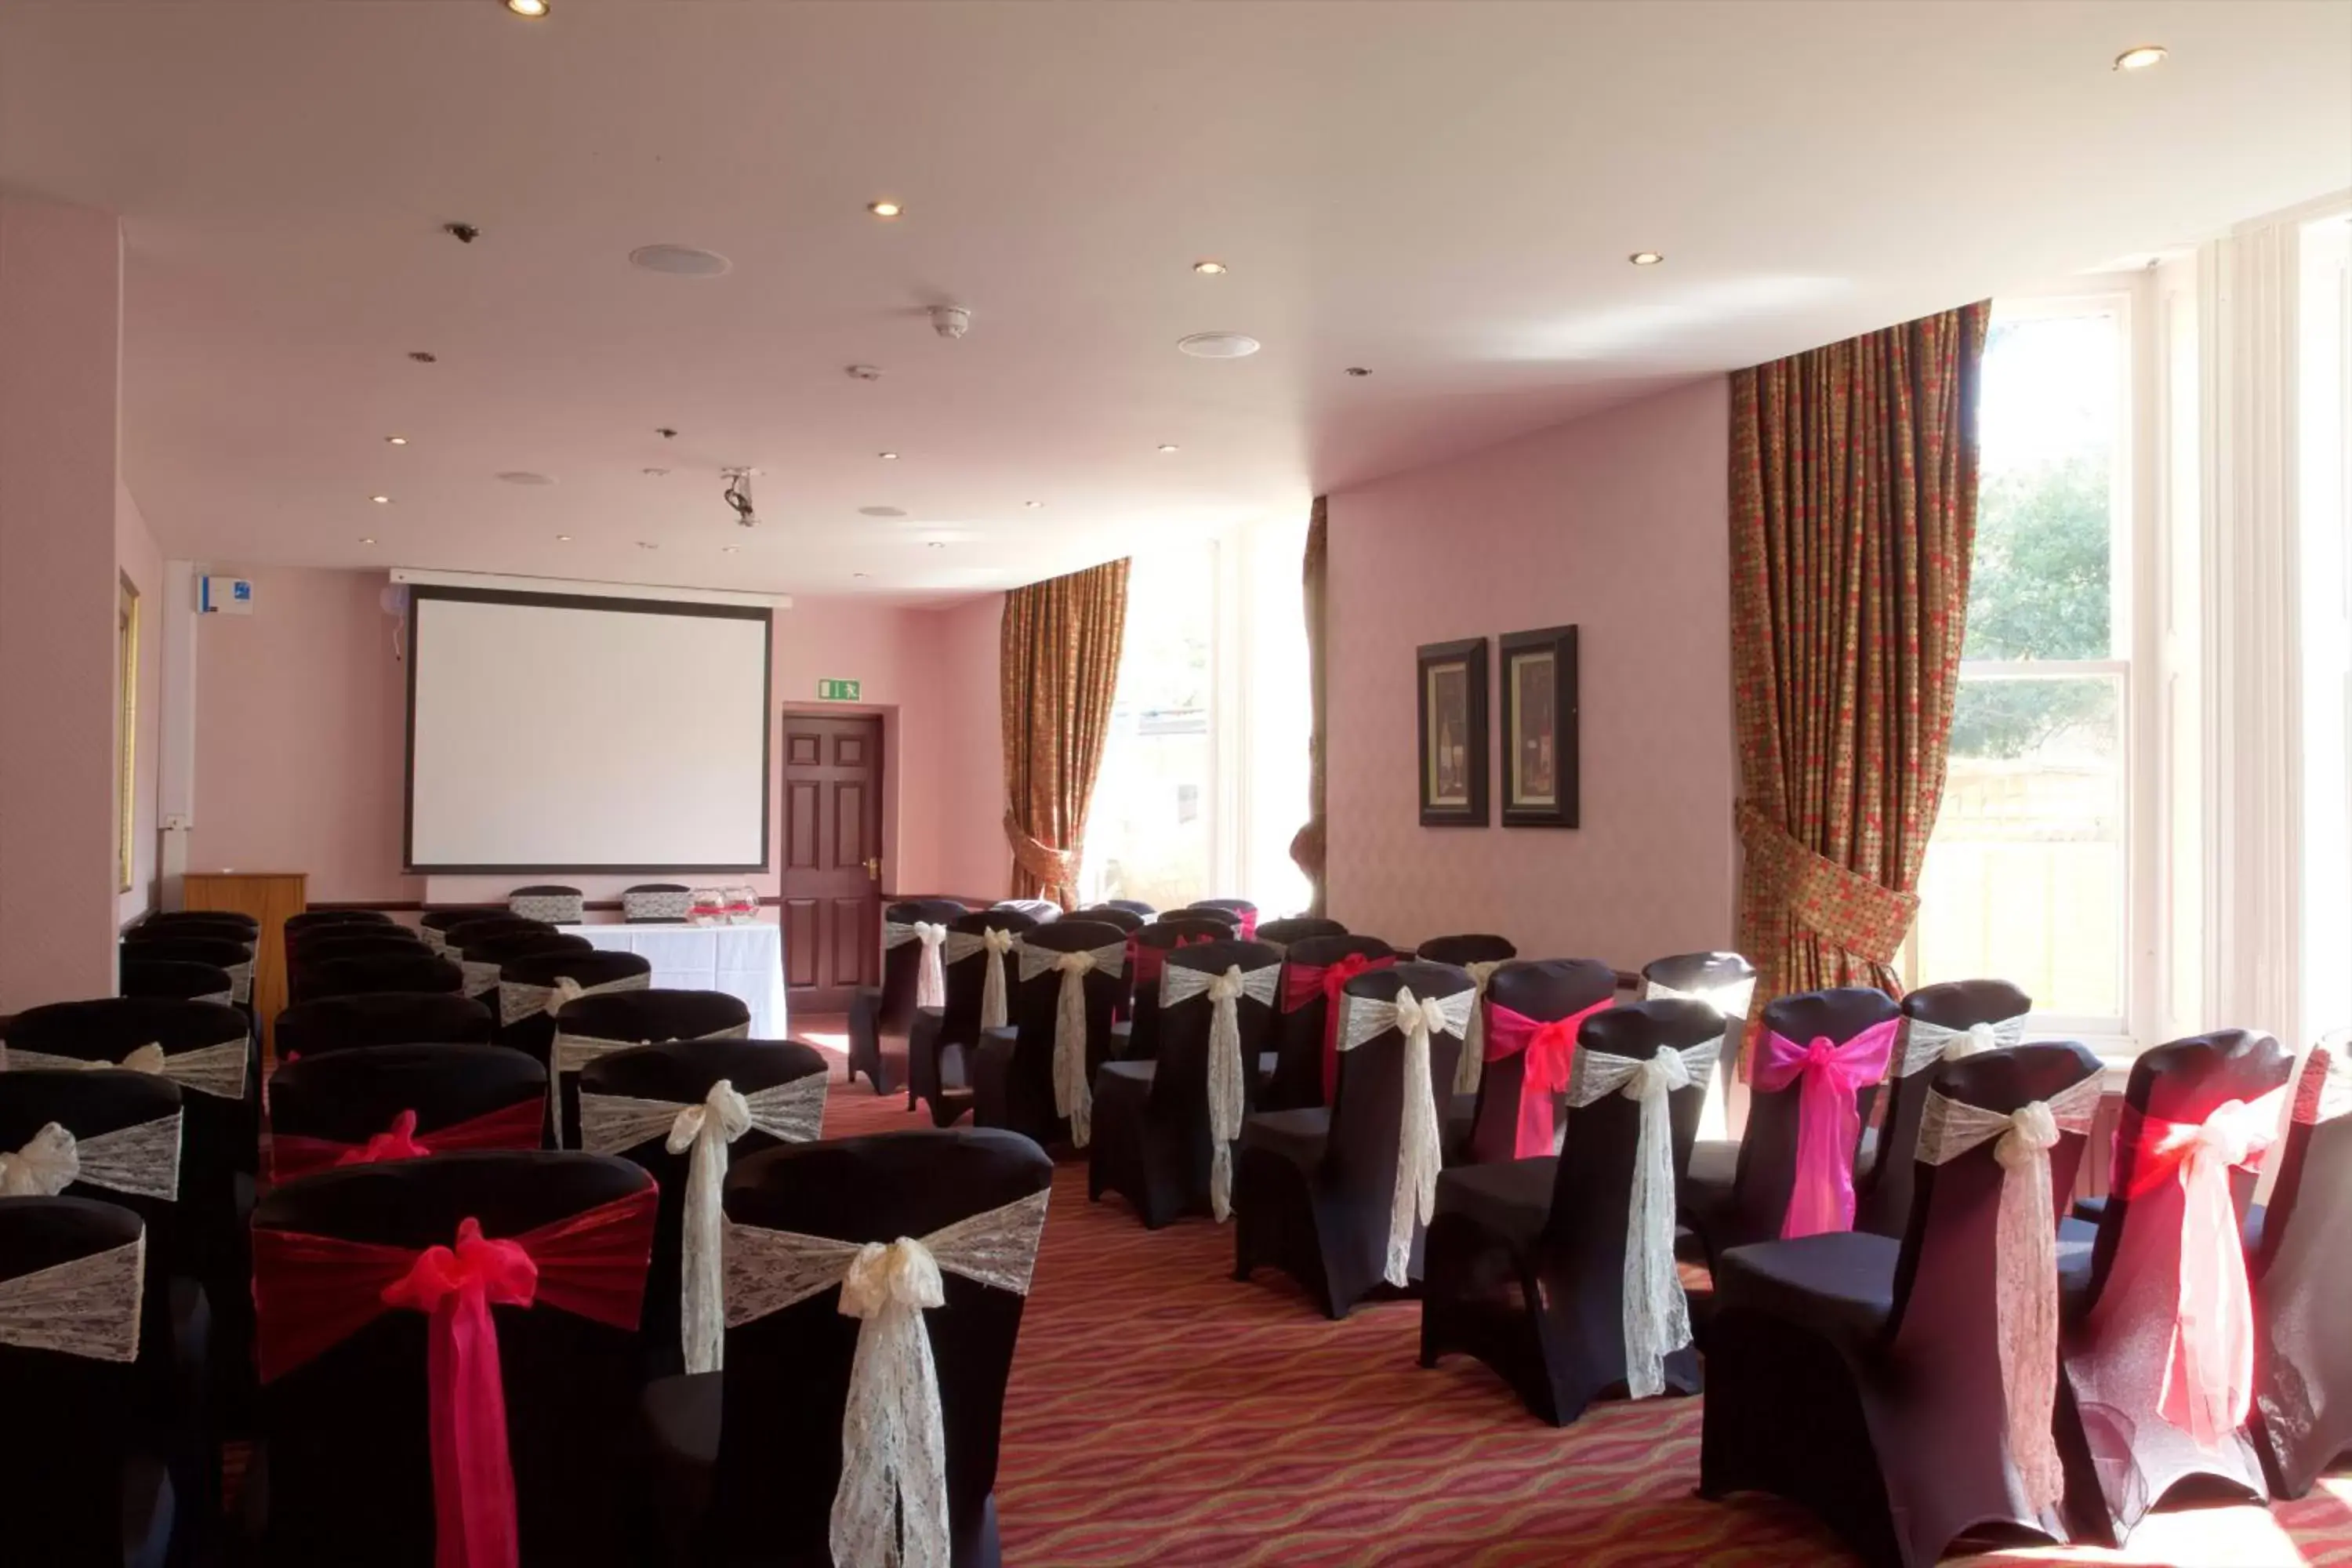 Banquet/Function facilities, Banquet Facilities in Bournemouth West Cliff Hotel